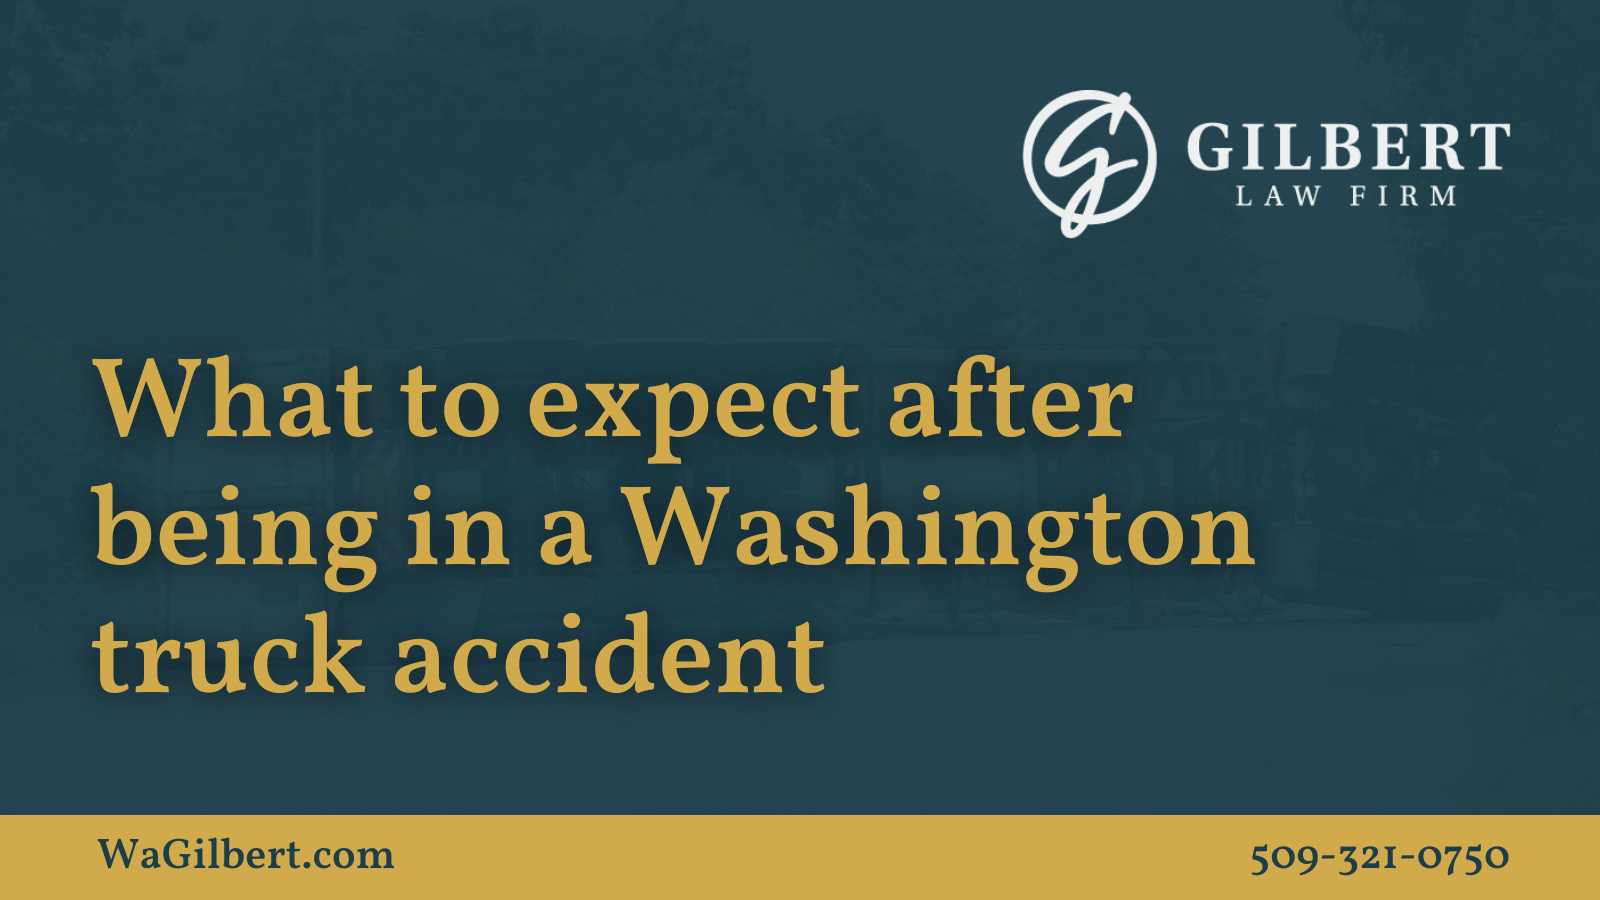 What to expect after being in a Washington truck accident | Gilbert Law Firm Spokane Washington